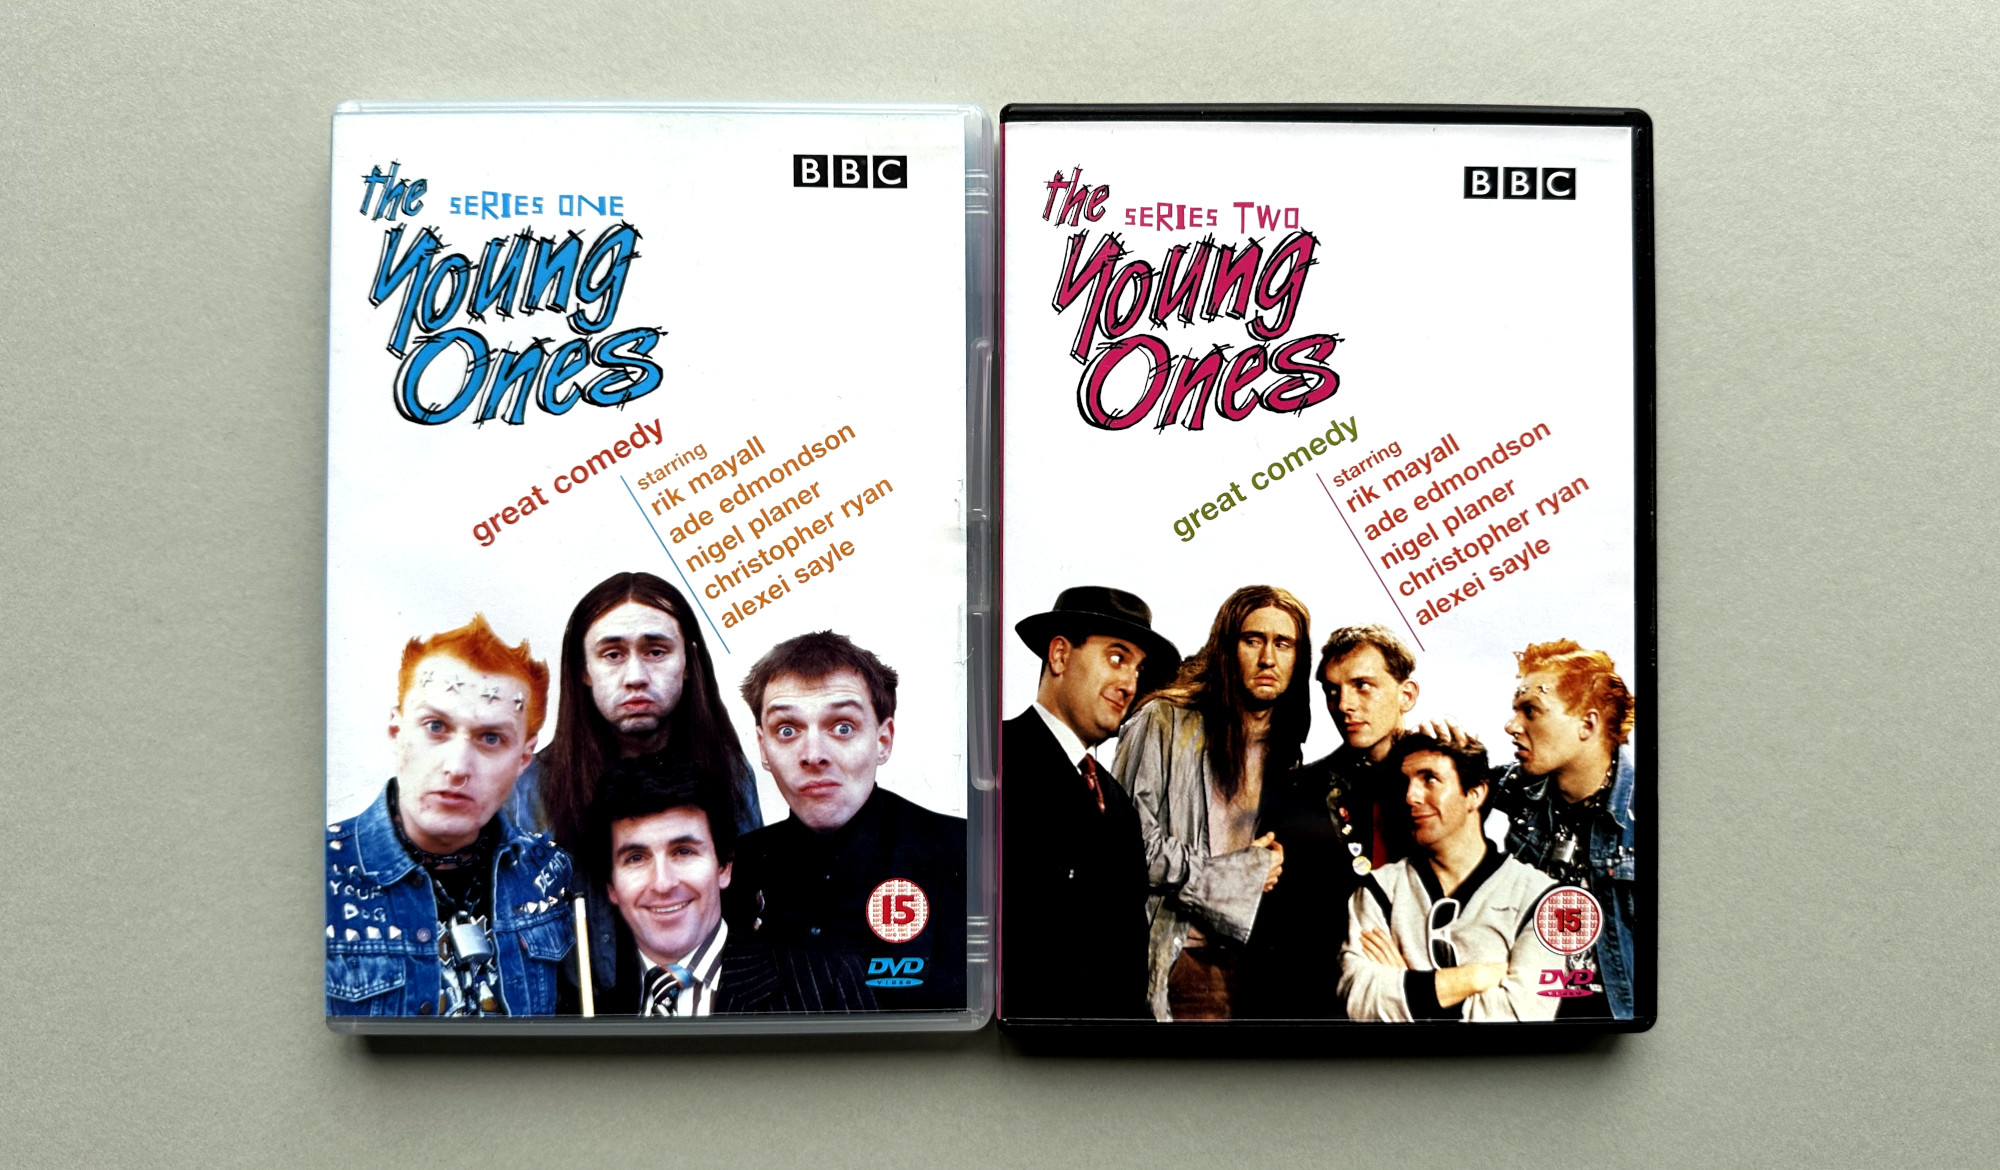 Young Ones DVD releases from 2002/03, with the white cover